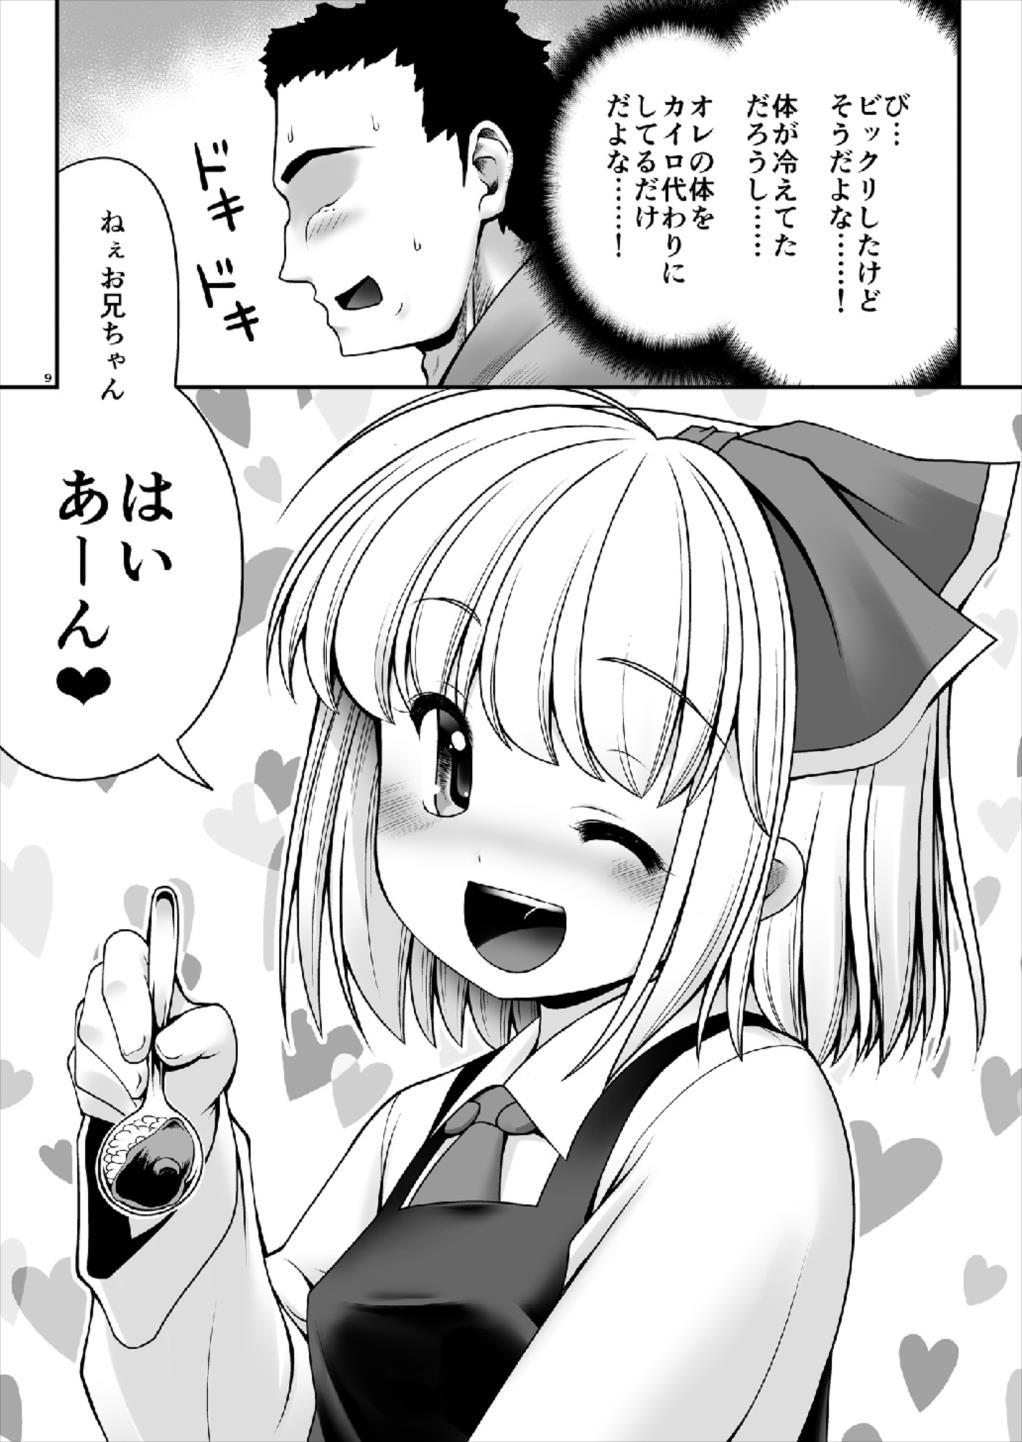 Licking Pussy "Okaeshi" - Touhou project Glam - Page 8